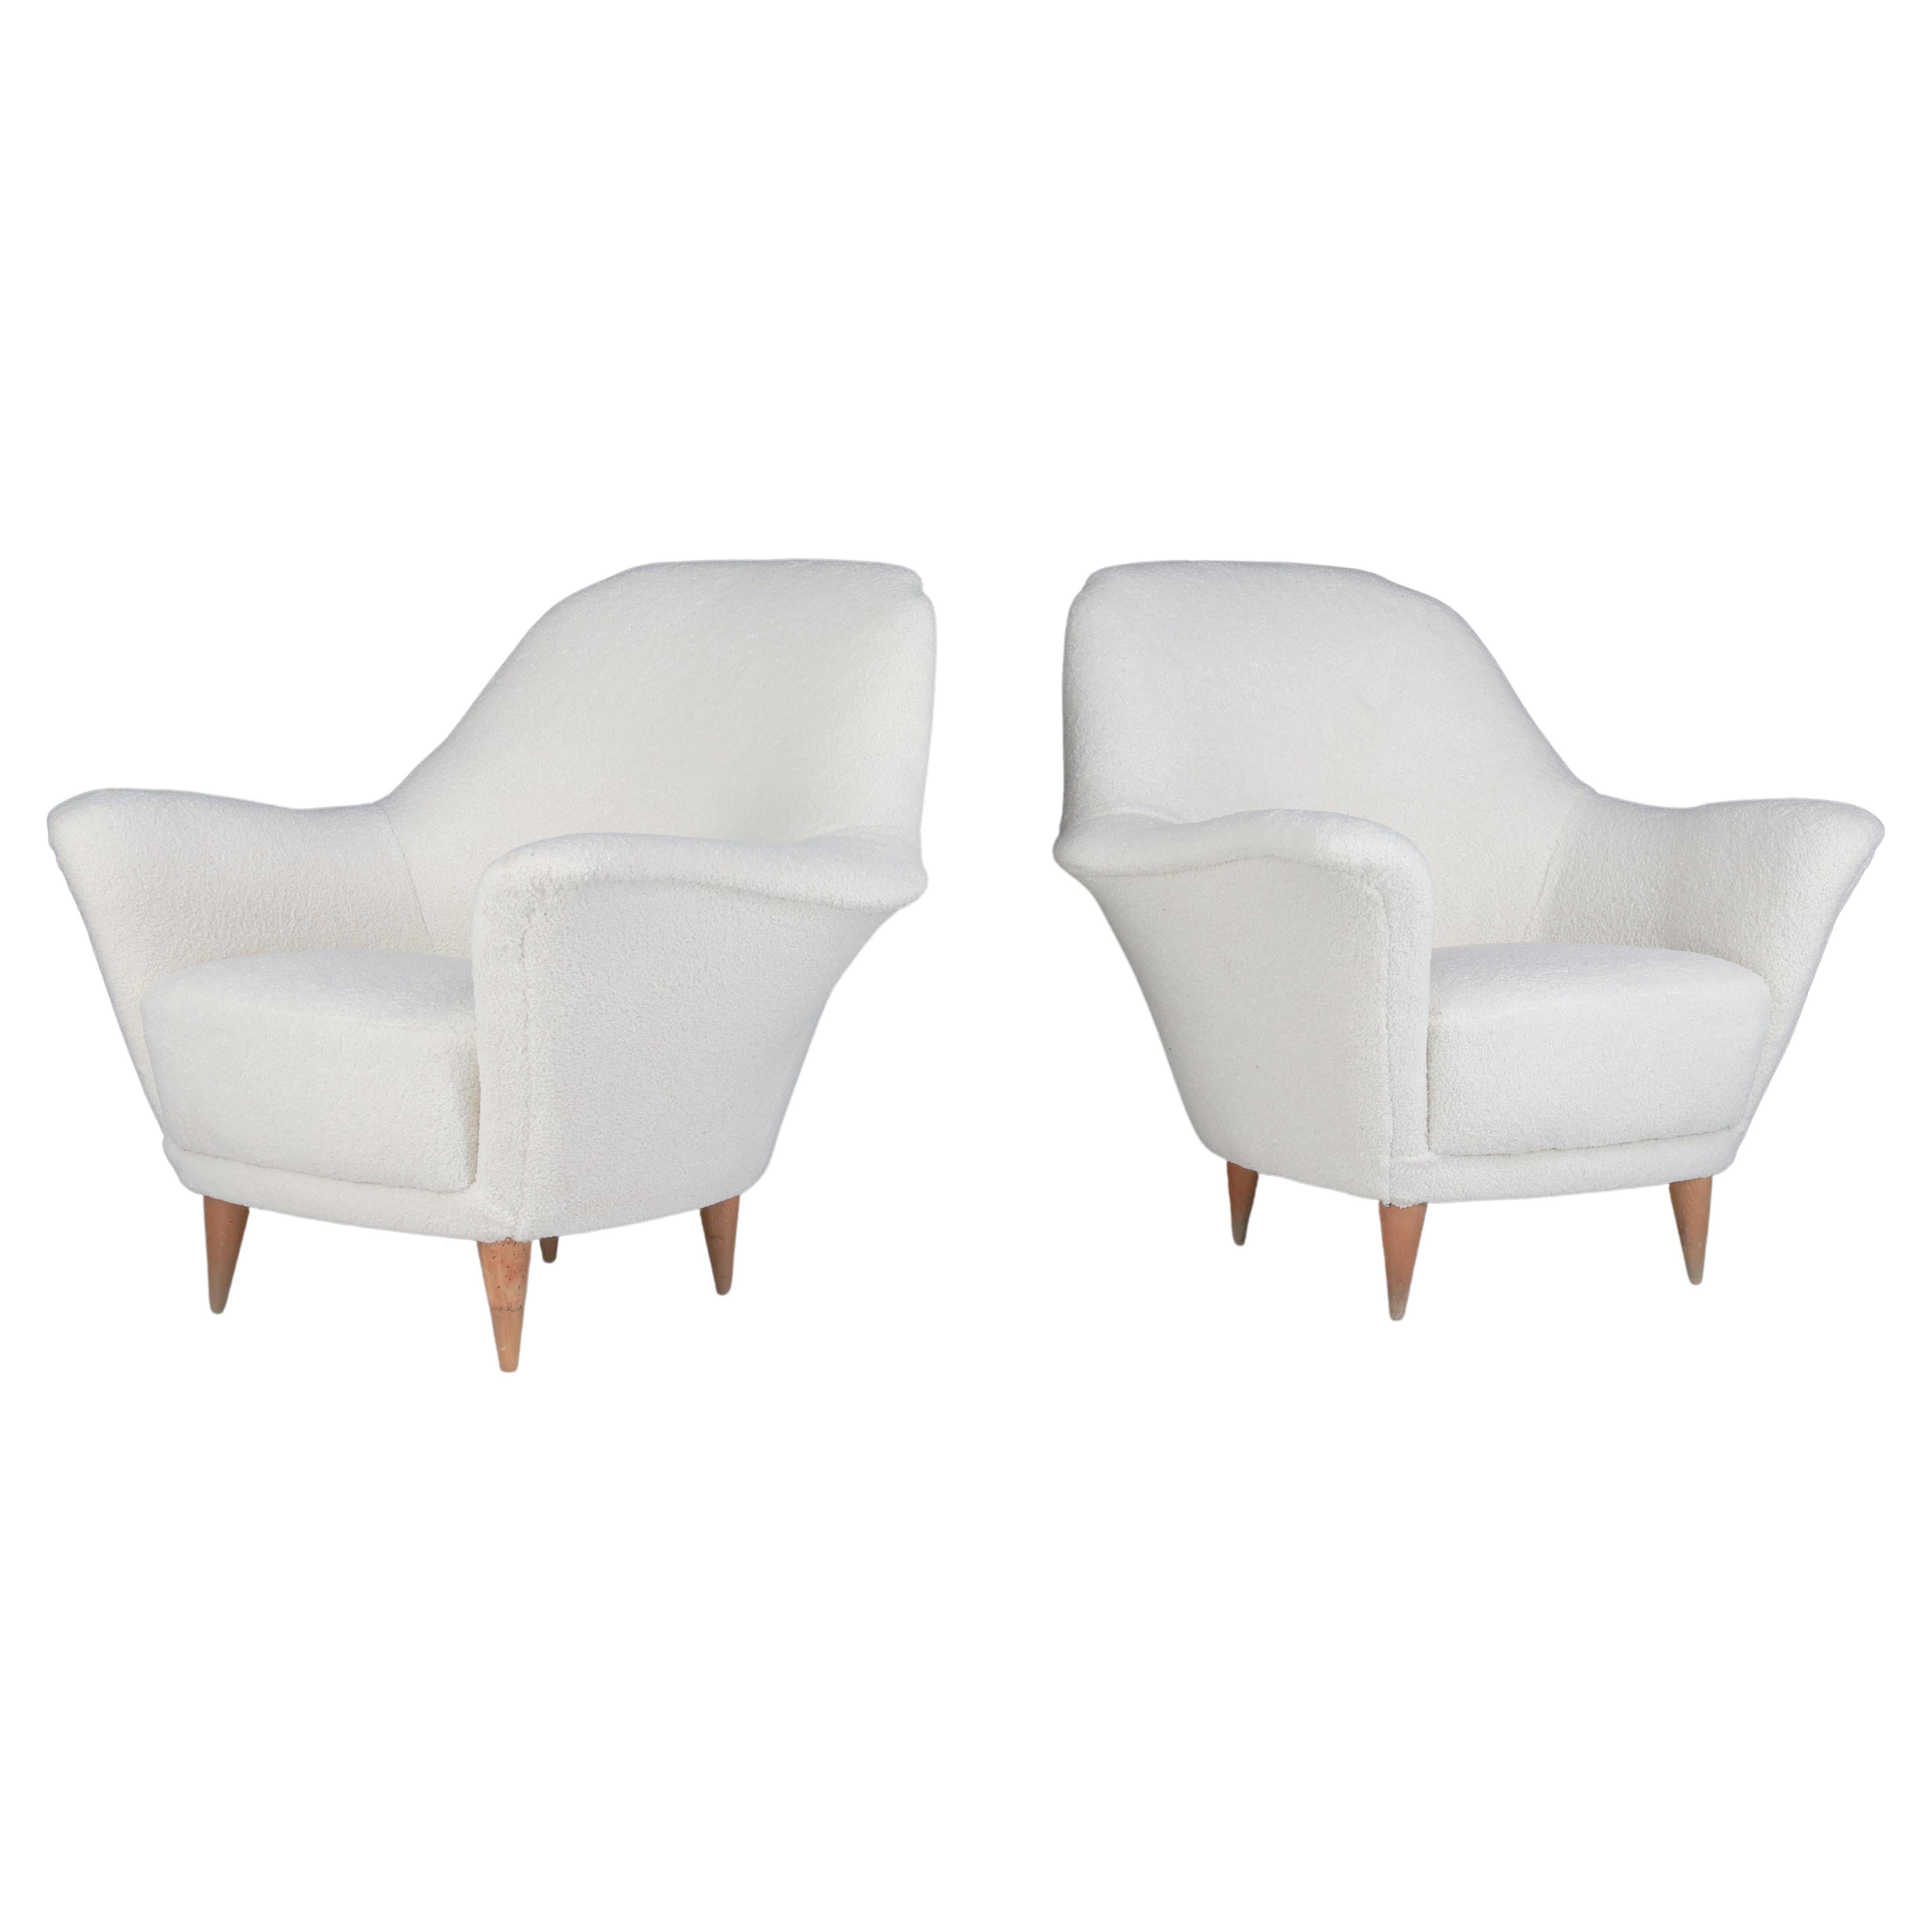 Pair Curved Armchairs by Ico Parisi in Newly Upholstered Teddy Fabric, Italy '50